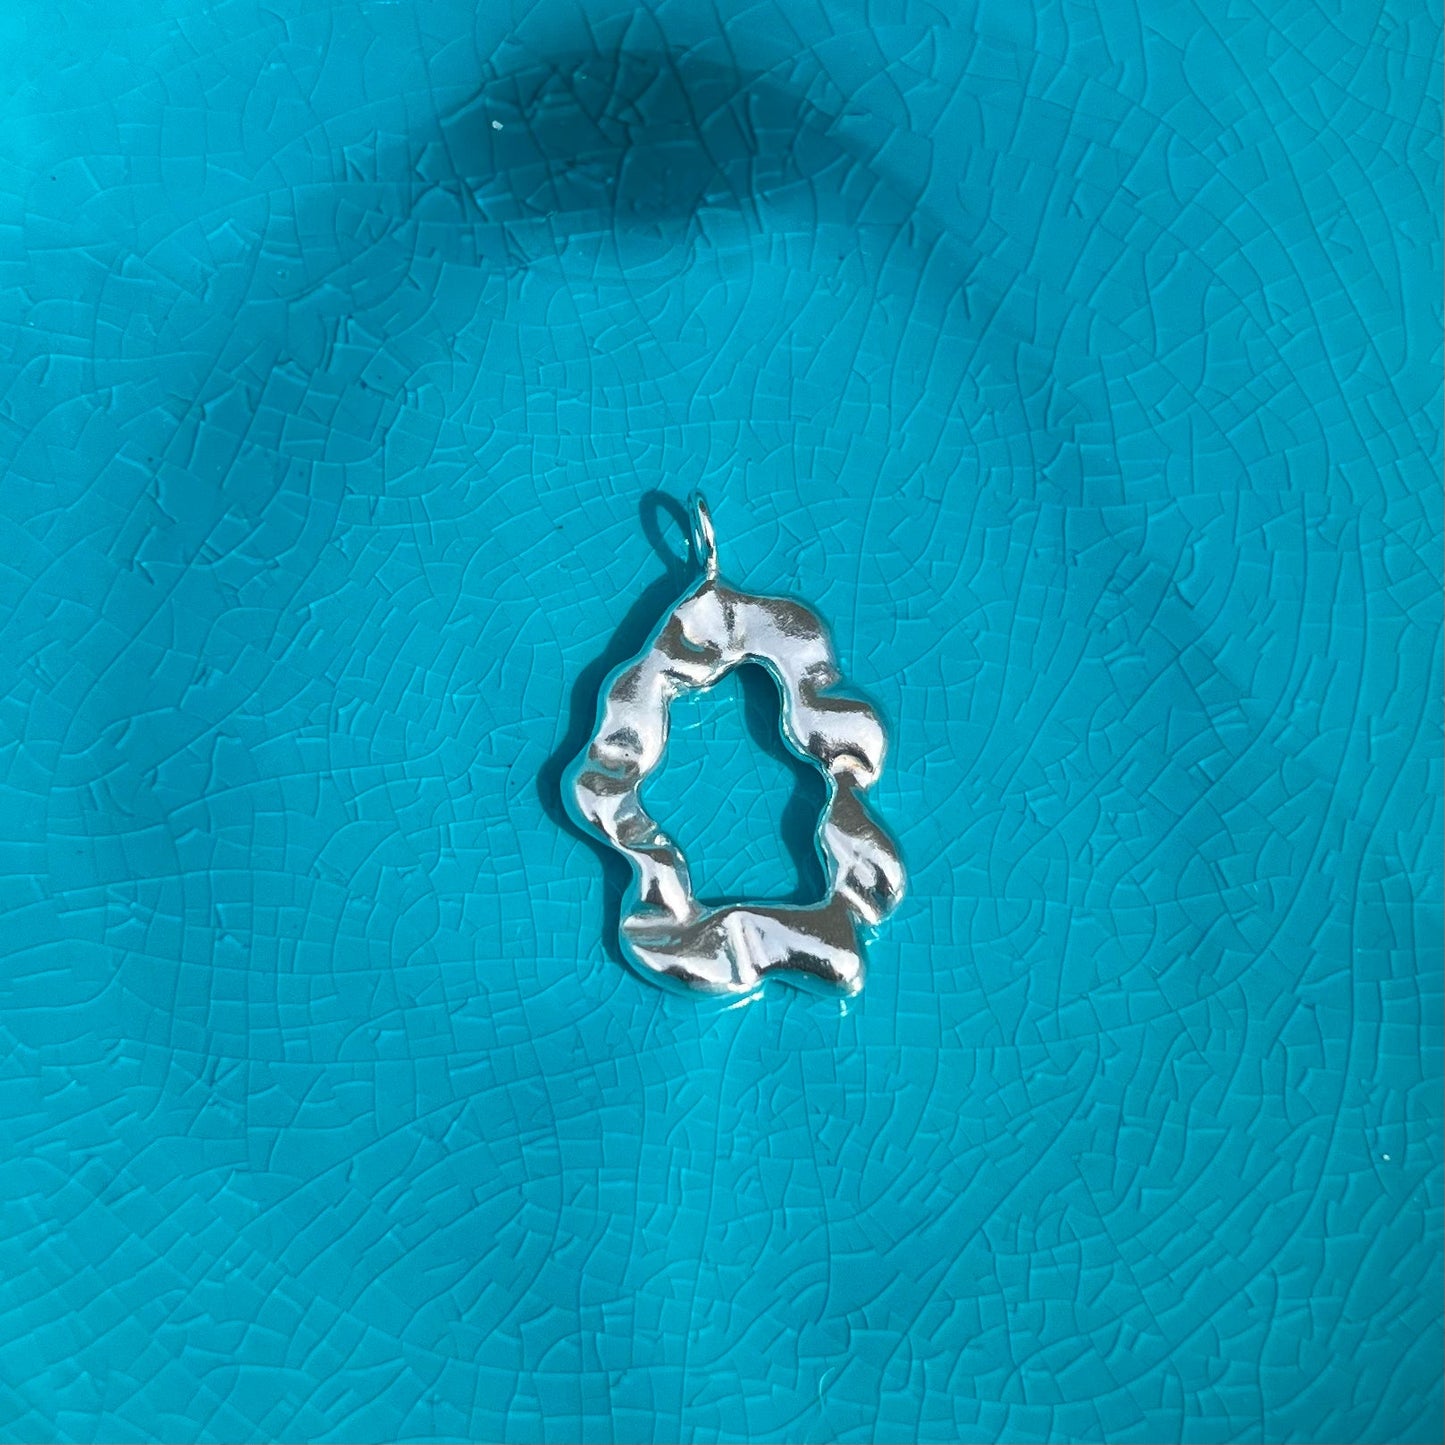 The 'Cloud pendant'. A sterling silver abstract pendant on an azure blue background.